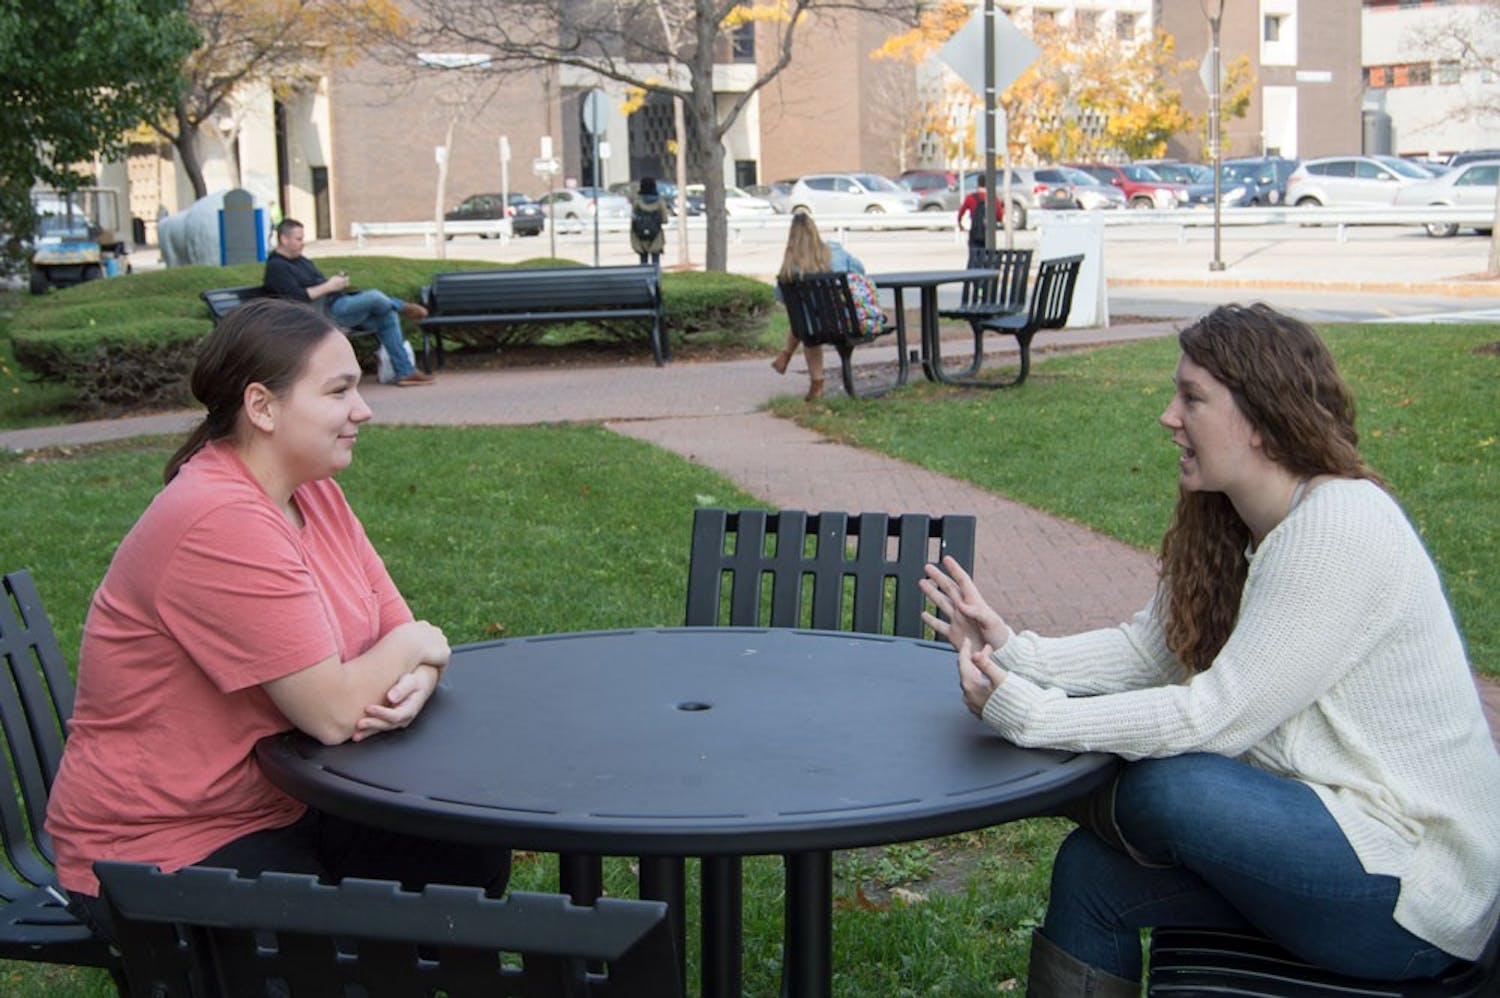 Danielle Dispenza (right) and Sarah Fullington (left) sit outside of the Student Union. Dispenza said she will vote for Hillary Clinton due to her disdain for Donald Trump and Fullington said she will not vote at all.